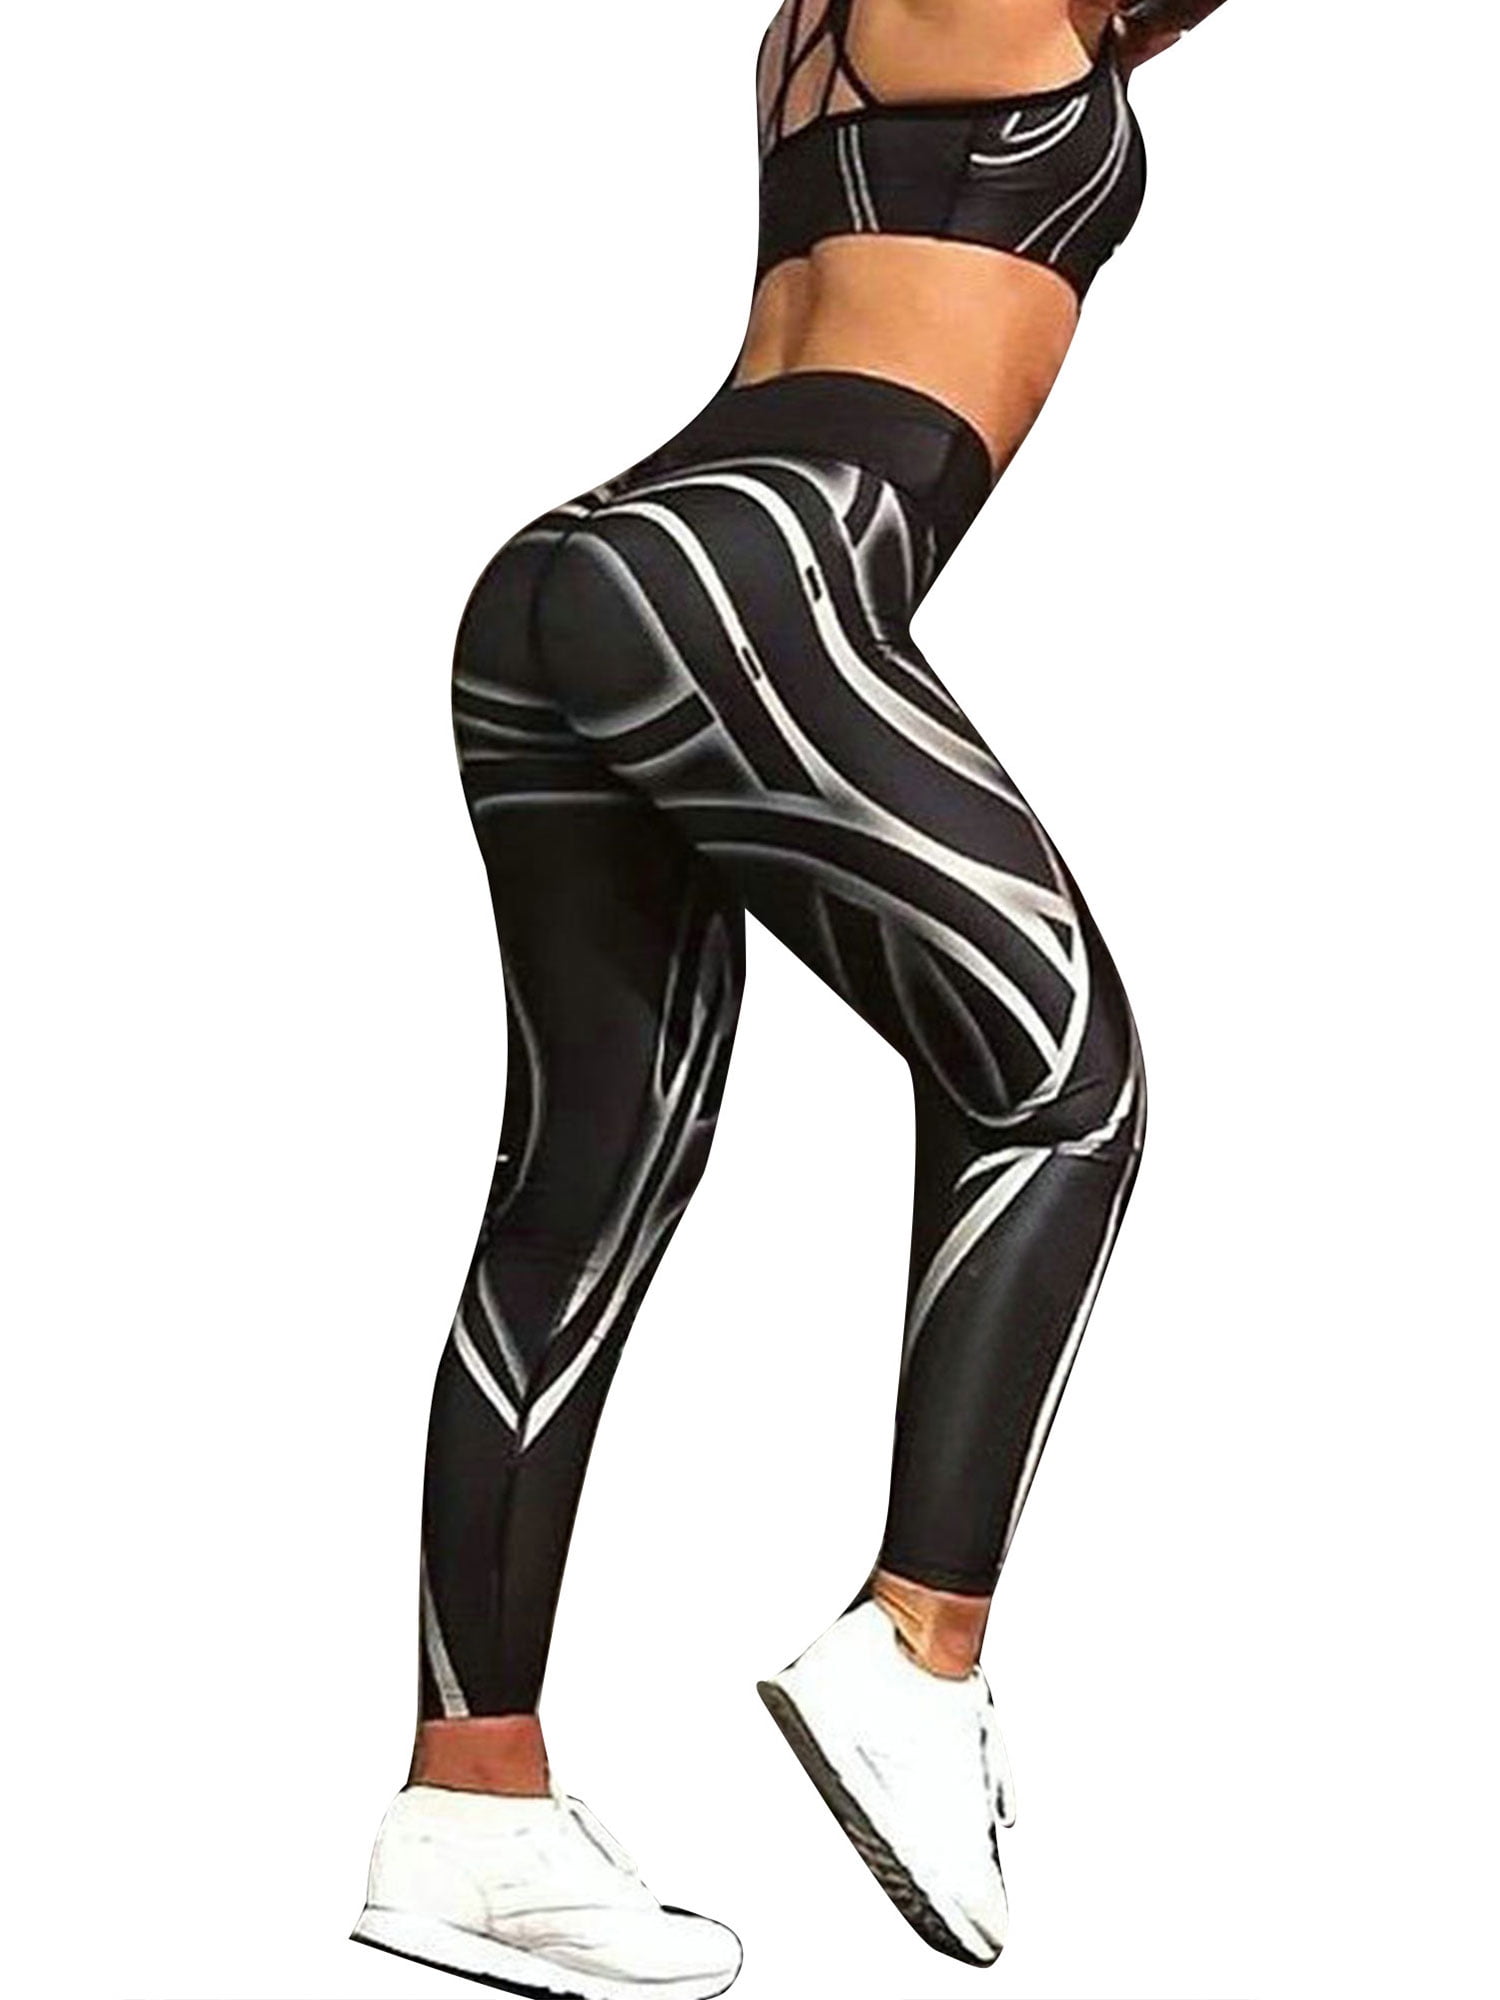  Kcutteyg Yoga Pants for Women with Pockets High